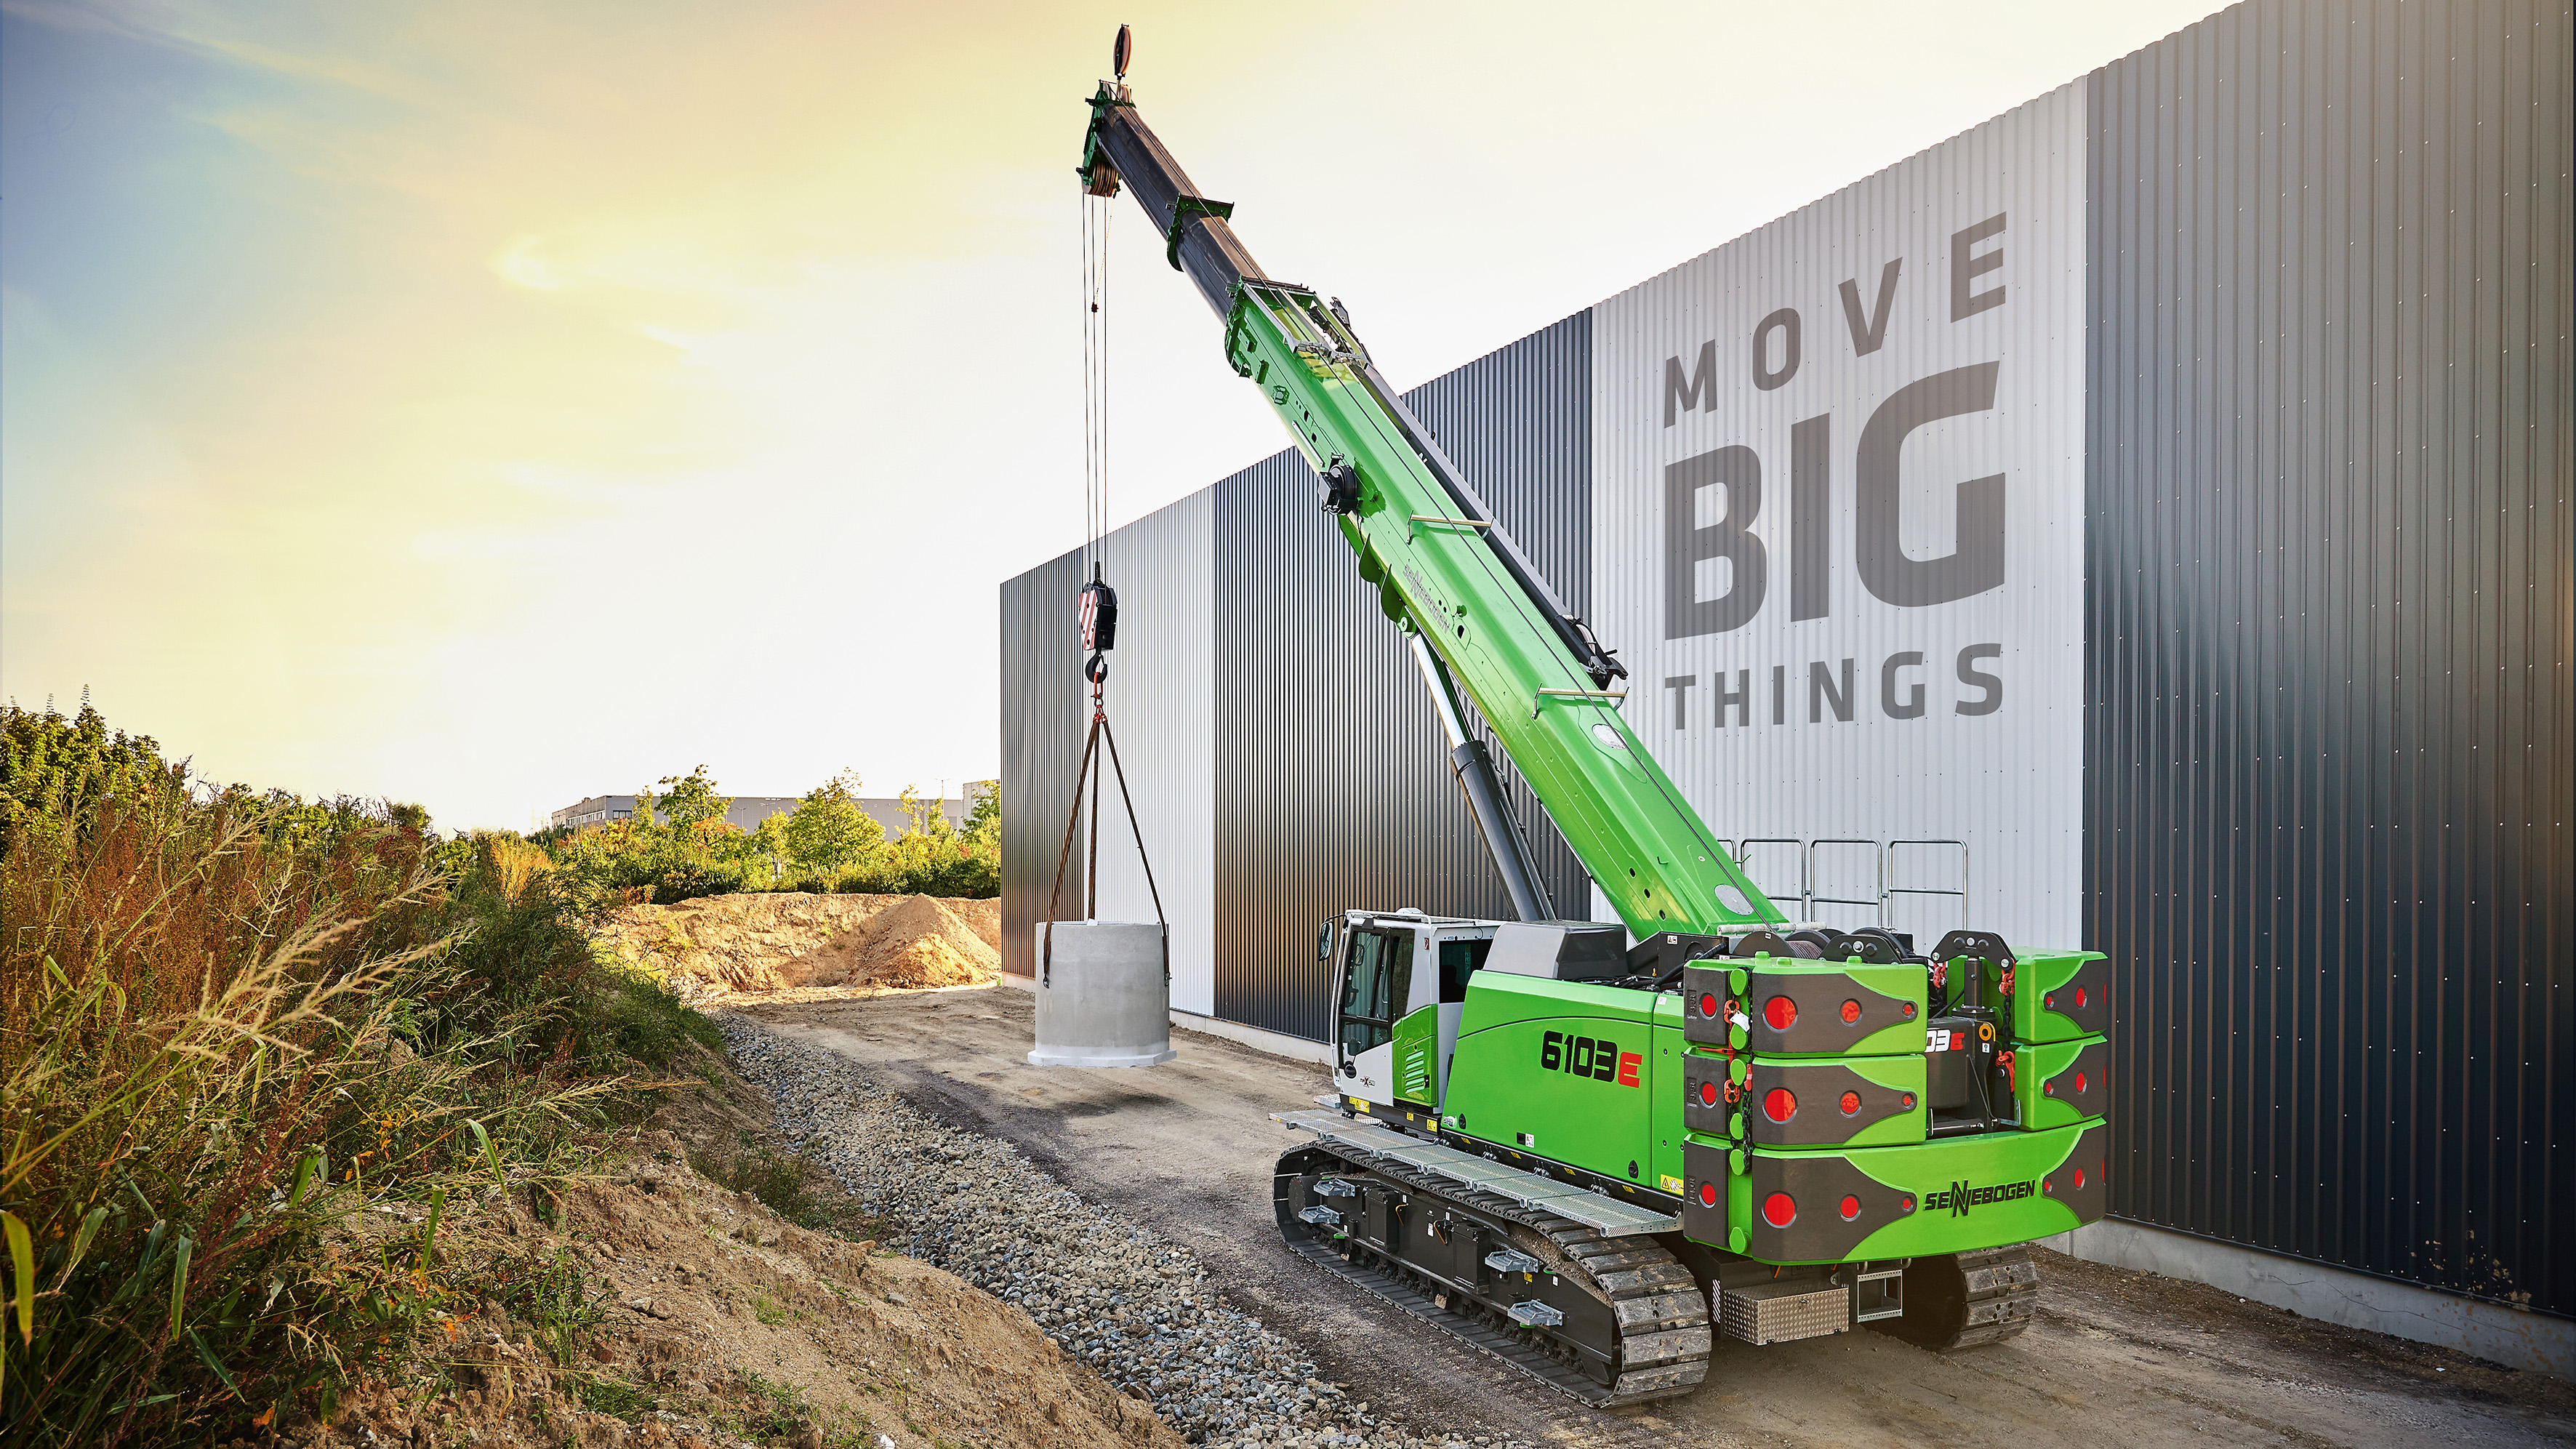 SENNEBOGEN is launching a new 100 t telescopic crawler crane on the market with the new 6103 E. The new machine complements the product portfolio and is attracting interest in particular with its boom length of up to 62 m and numerous equipment solutions for construction and civil engineering applications.